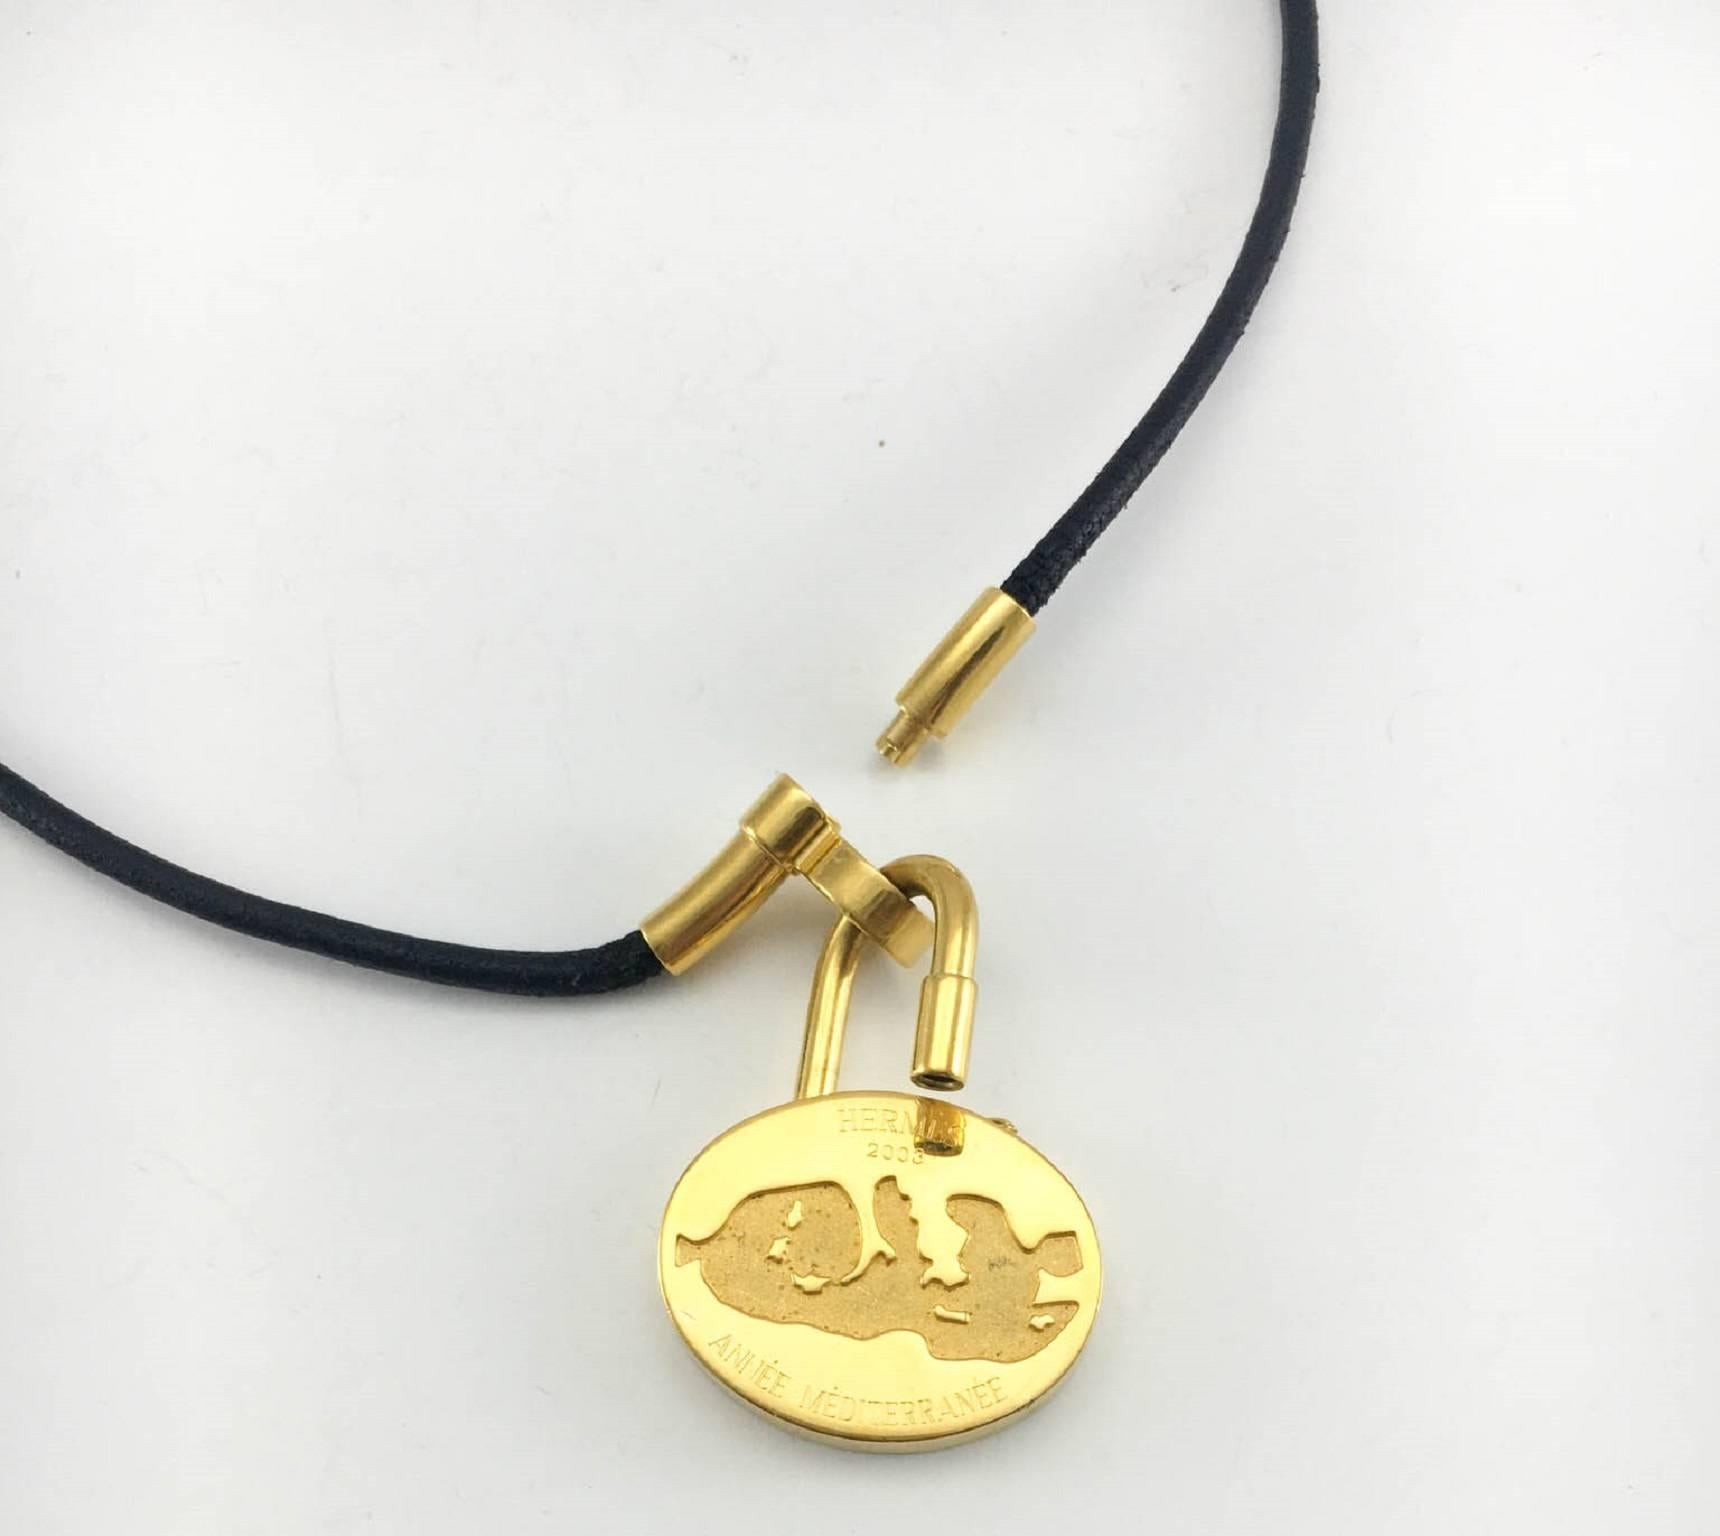 Hermes Gold-Plated Lock Pendant Necklace - 2003 2